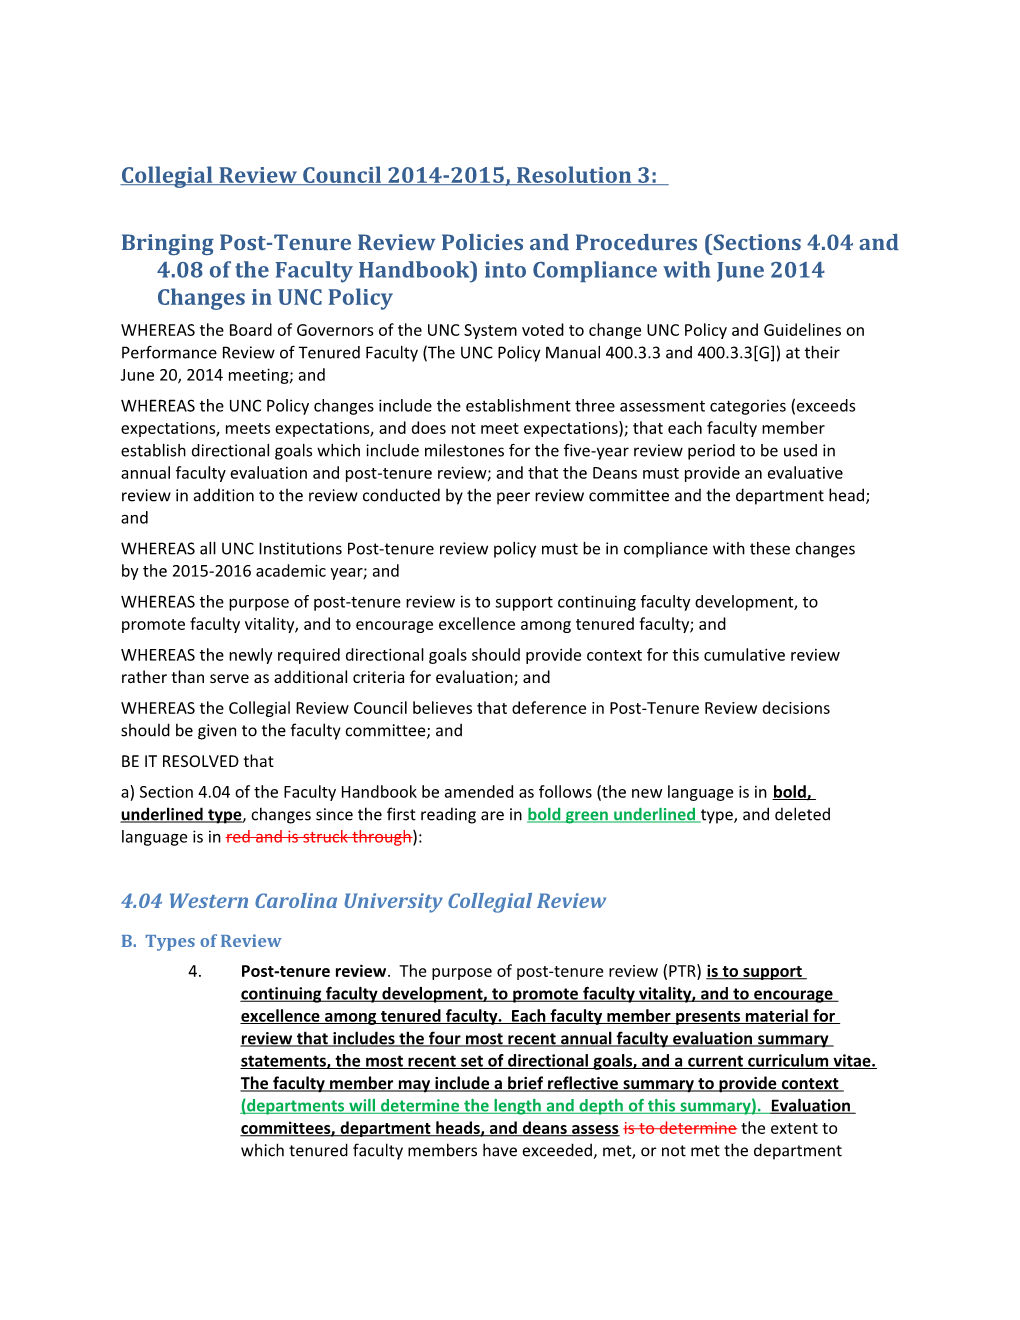 CRC Resolution3 Revised Forvote 4-23-2014 Post-Tenurereviewchanges Compliancetouncpolicy